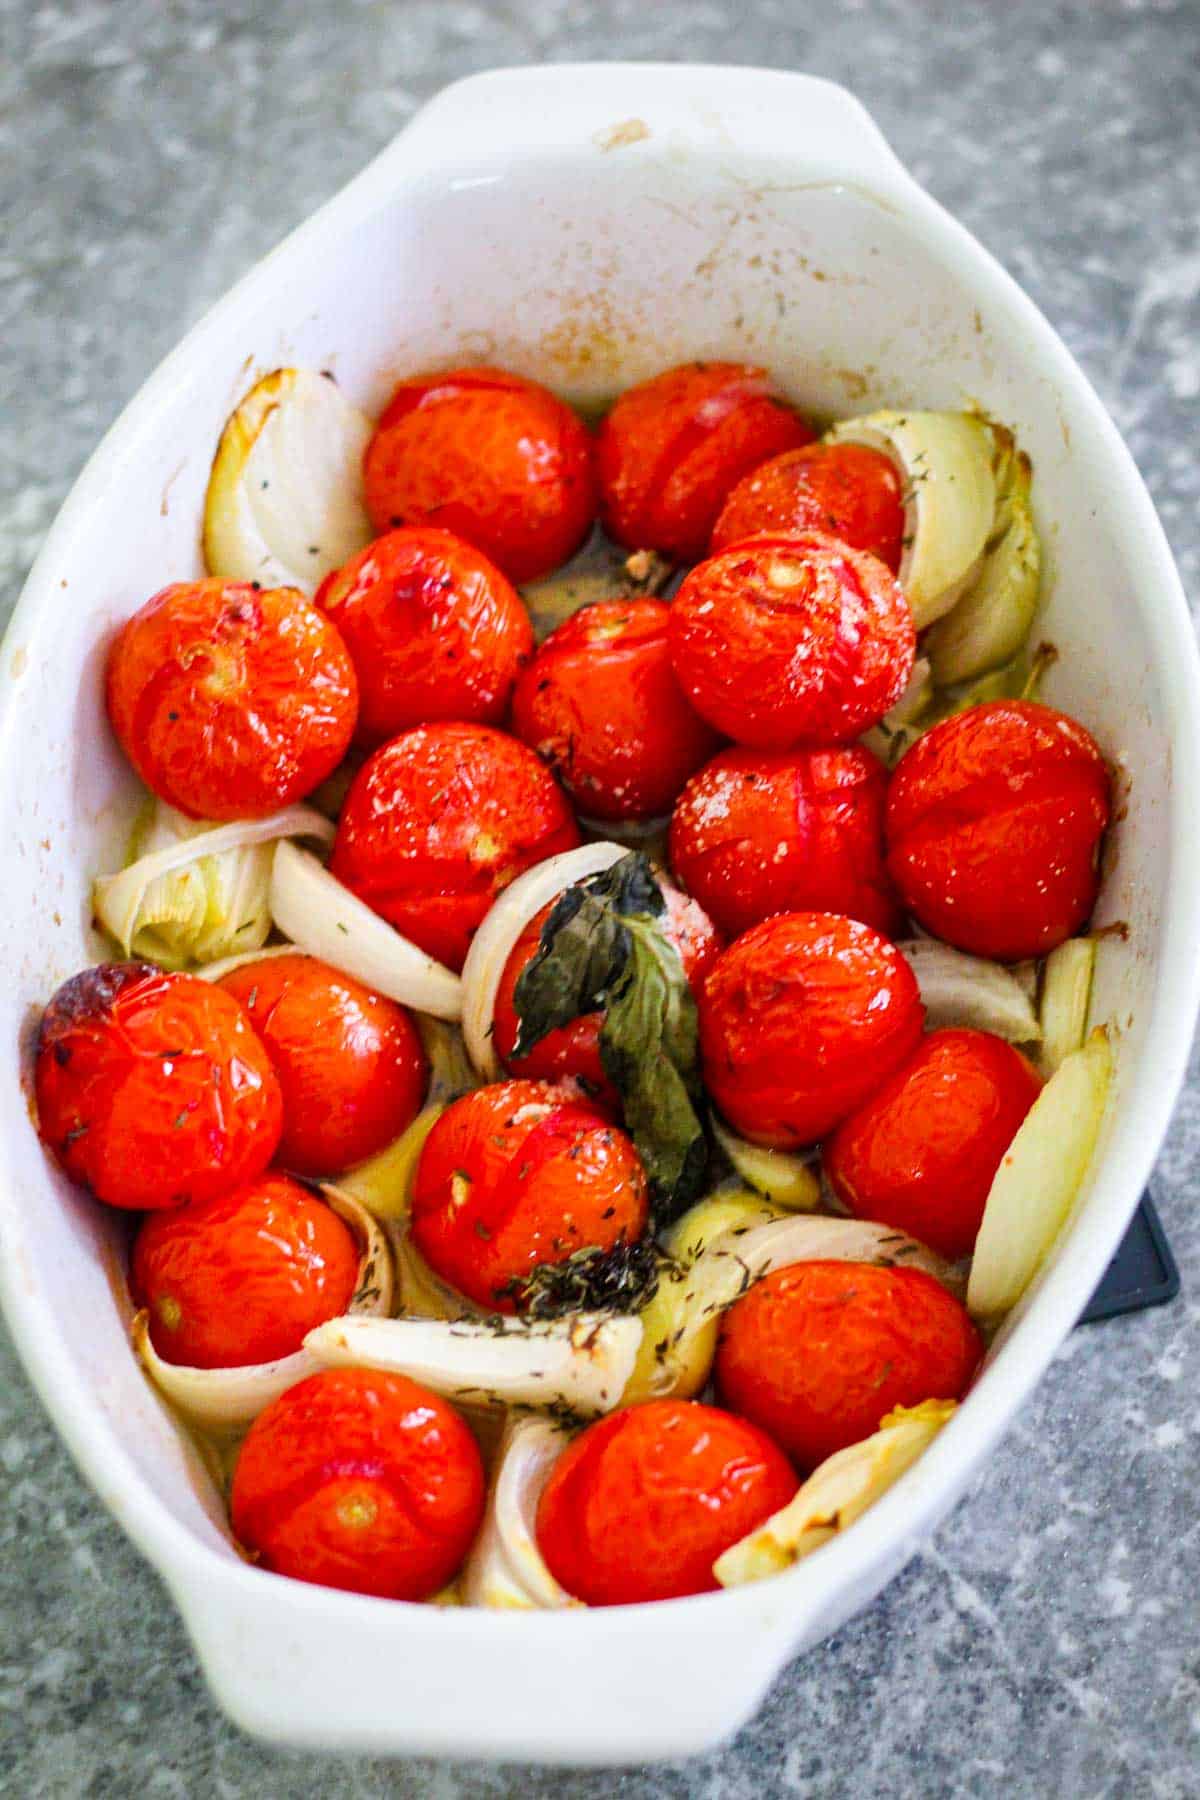 Roasted tomatoes, garlic, onions and herbs with olive oil. 